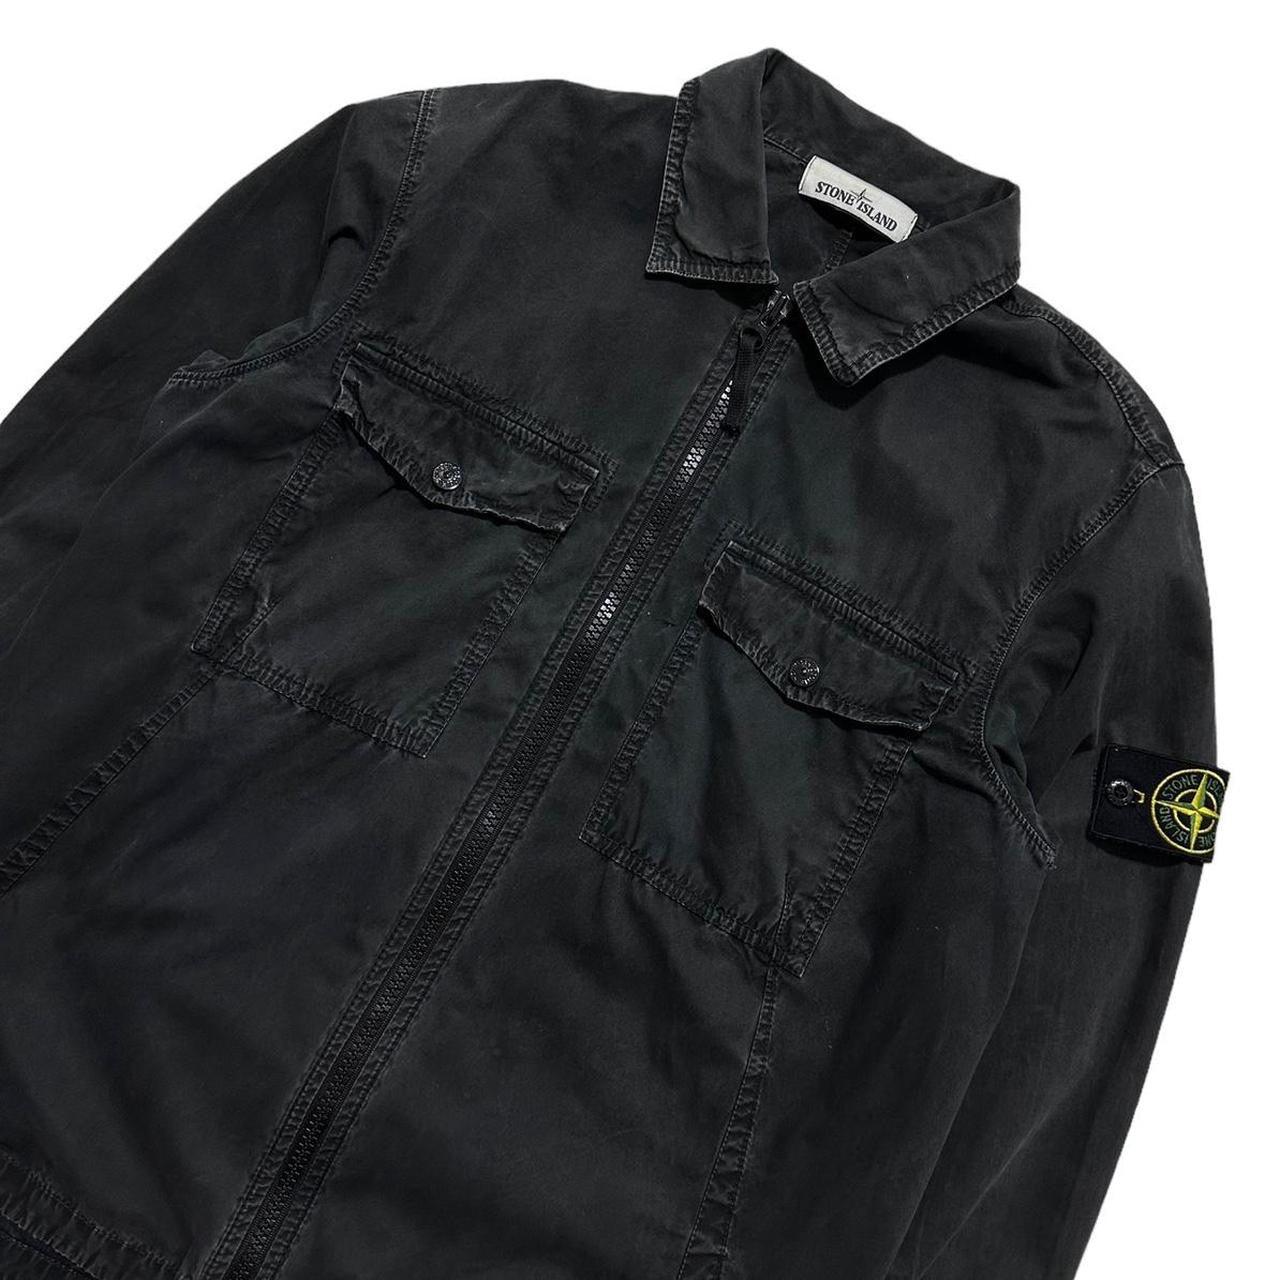 Stone Island canvas double pocket overshirt - Known Source